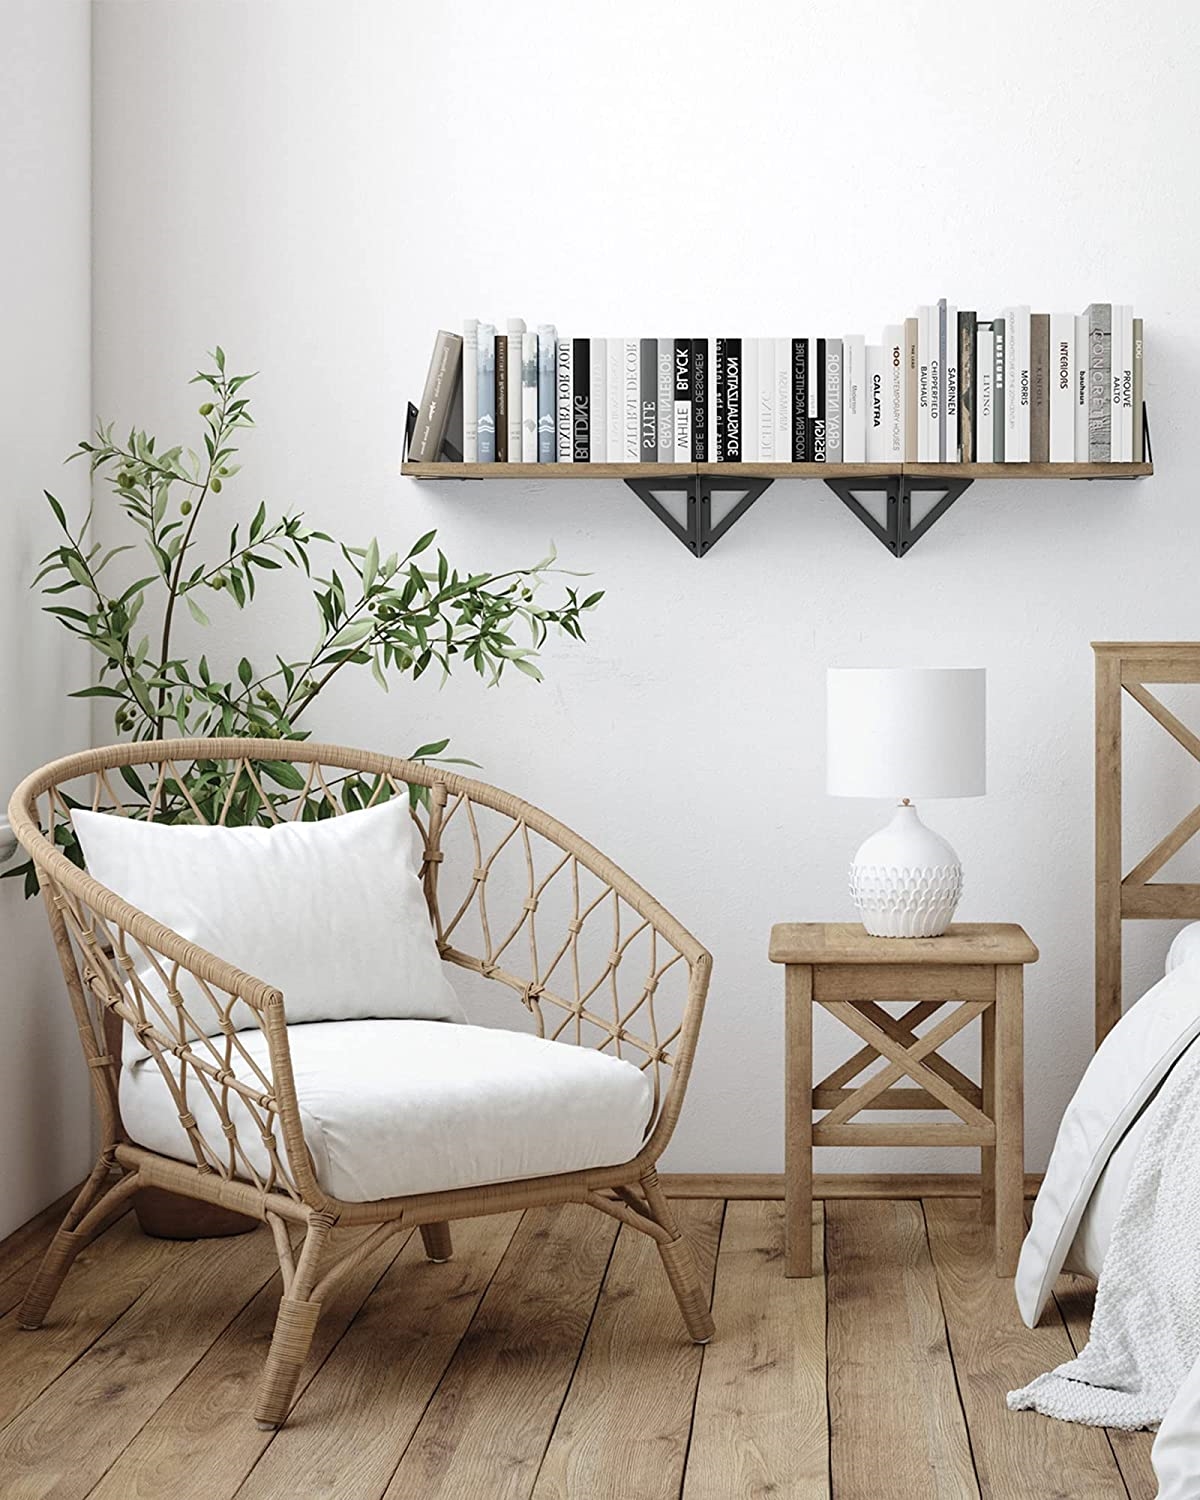 apartment decor ideas - bed side chair